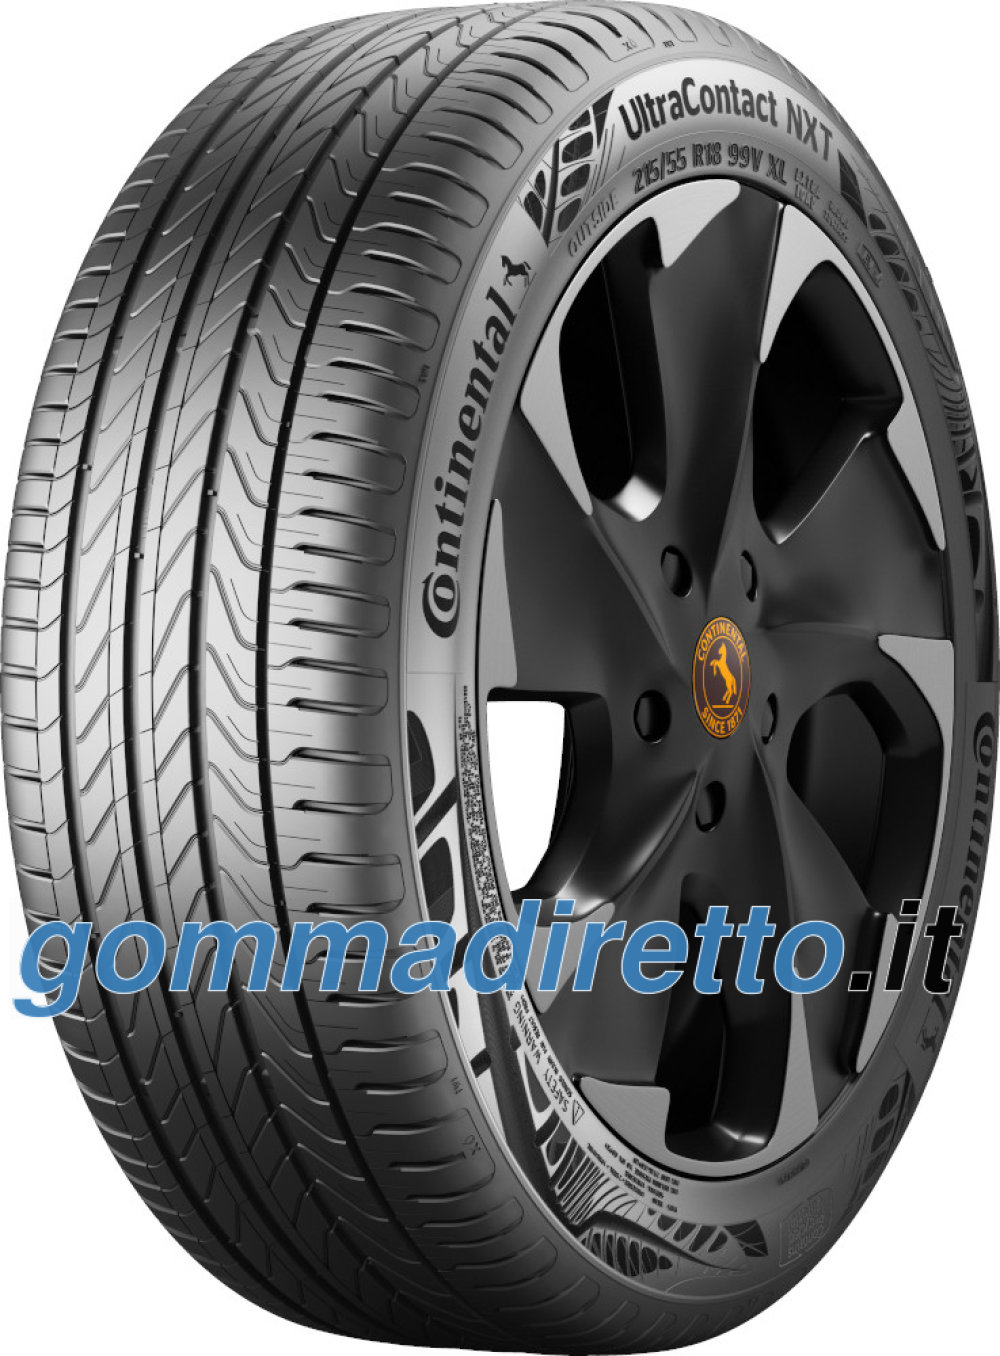 Image of Continental UltraContact NXT - ContiRe.Tex ( 225/50 R18 99W XL CRM, EVc )